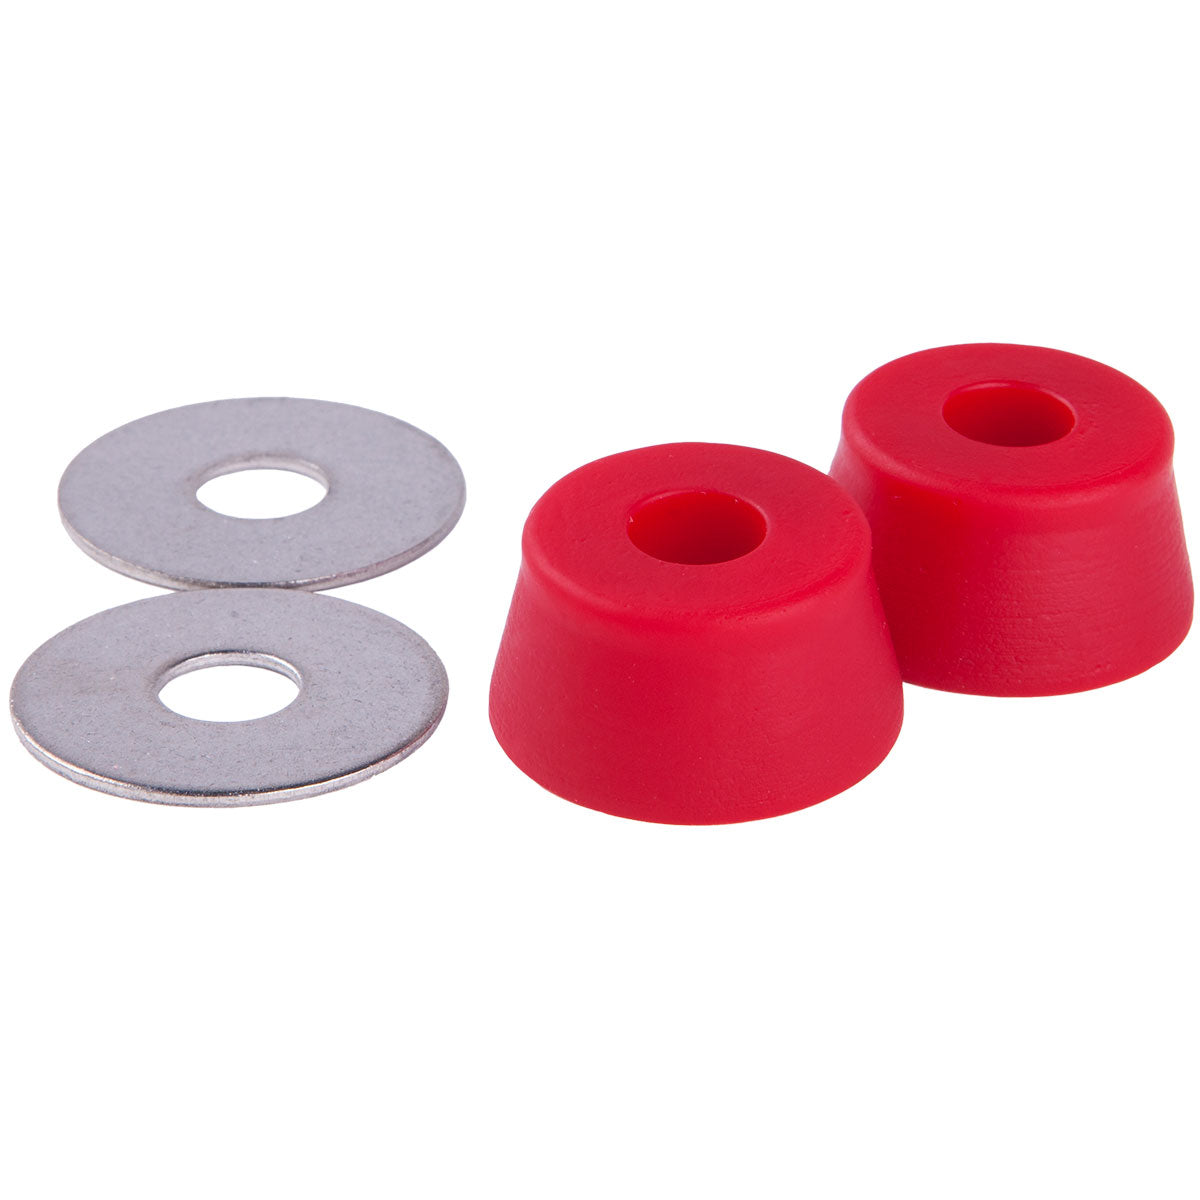 RipTide FatCone Bushings - APS - 95a Red image 1